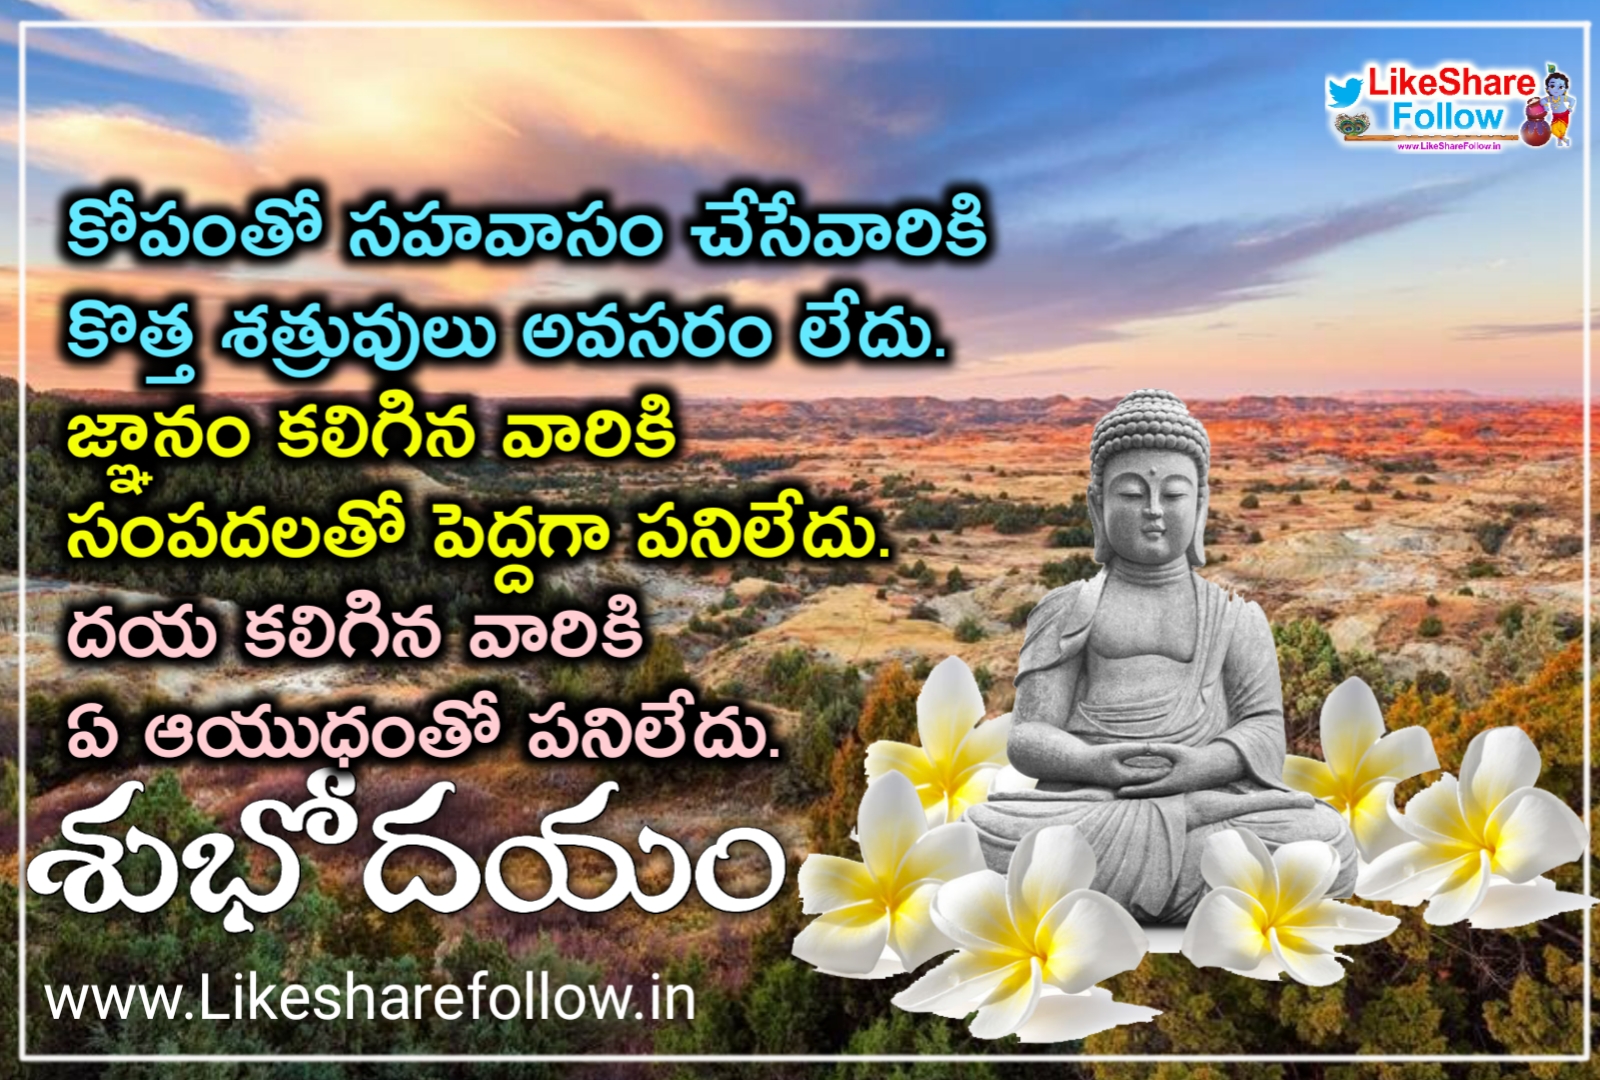 Best telugu good morning quotes images free download | Like Share ...